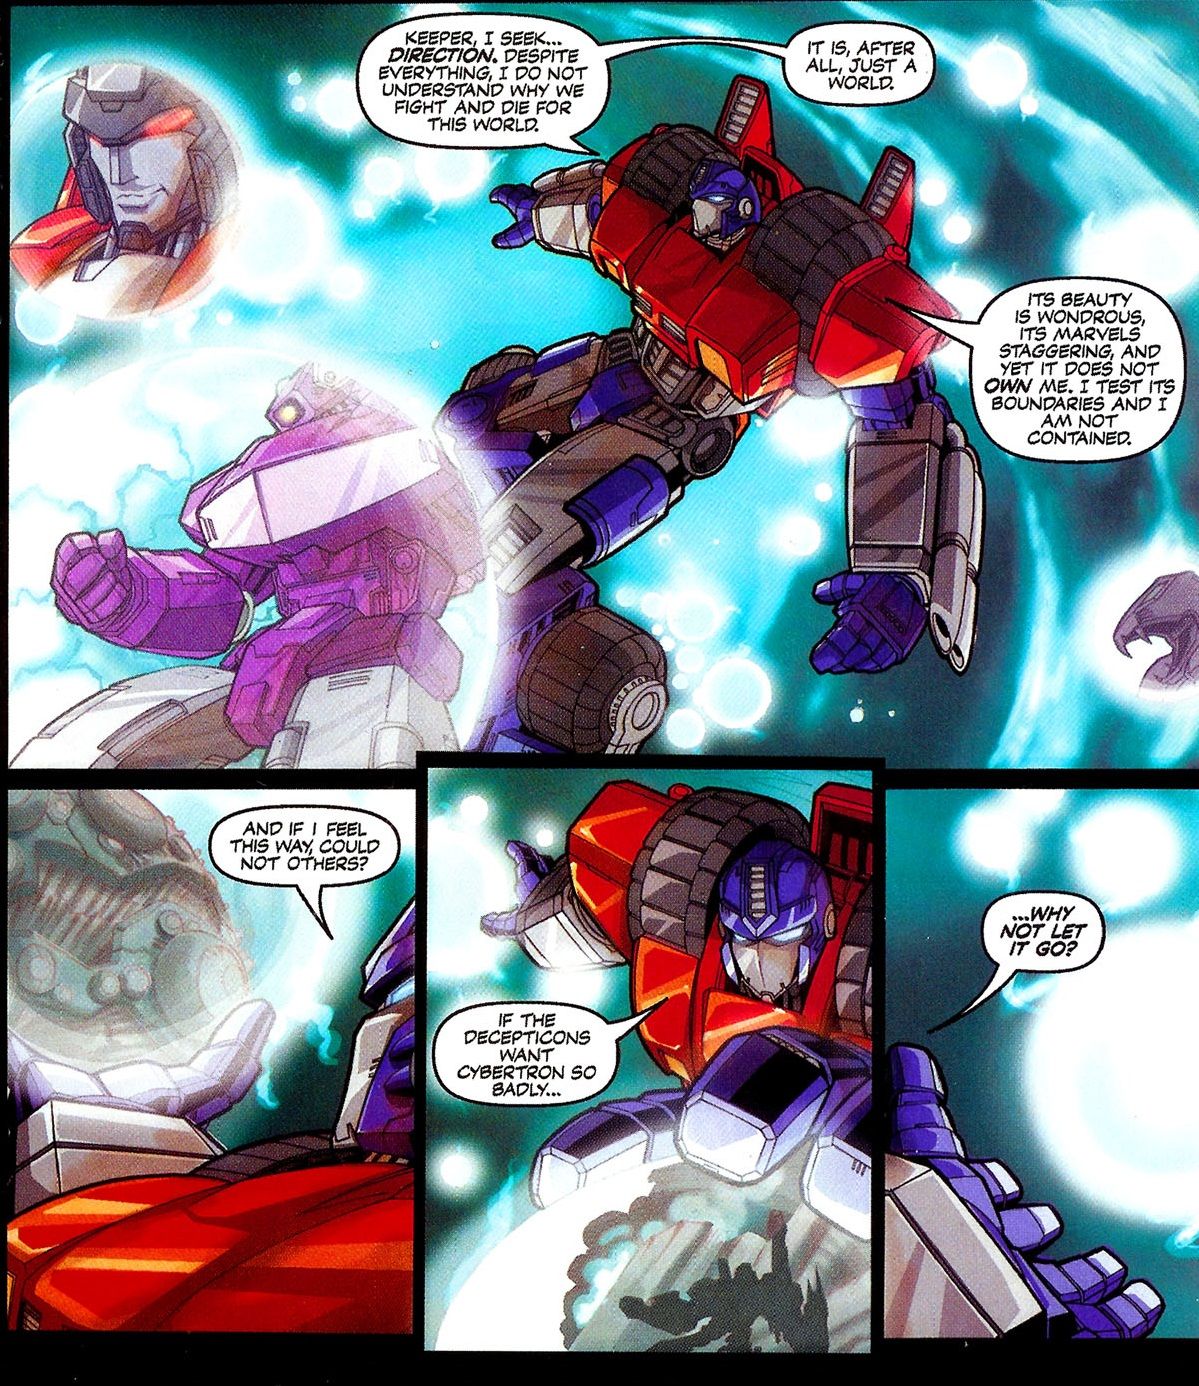 Optimus Prime decides to give Cybertron to the Decepticons. 